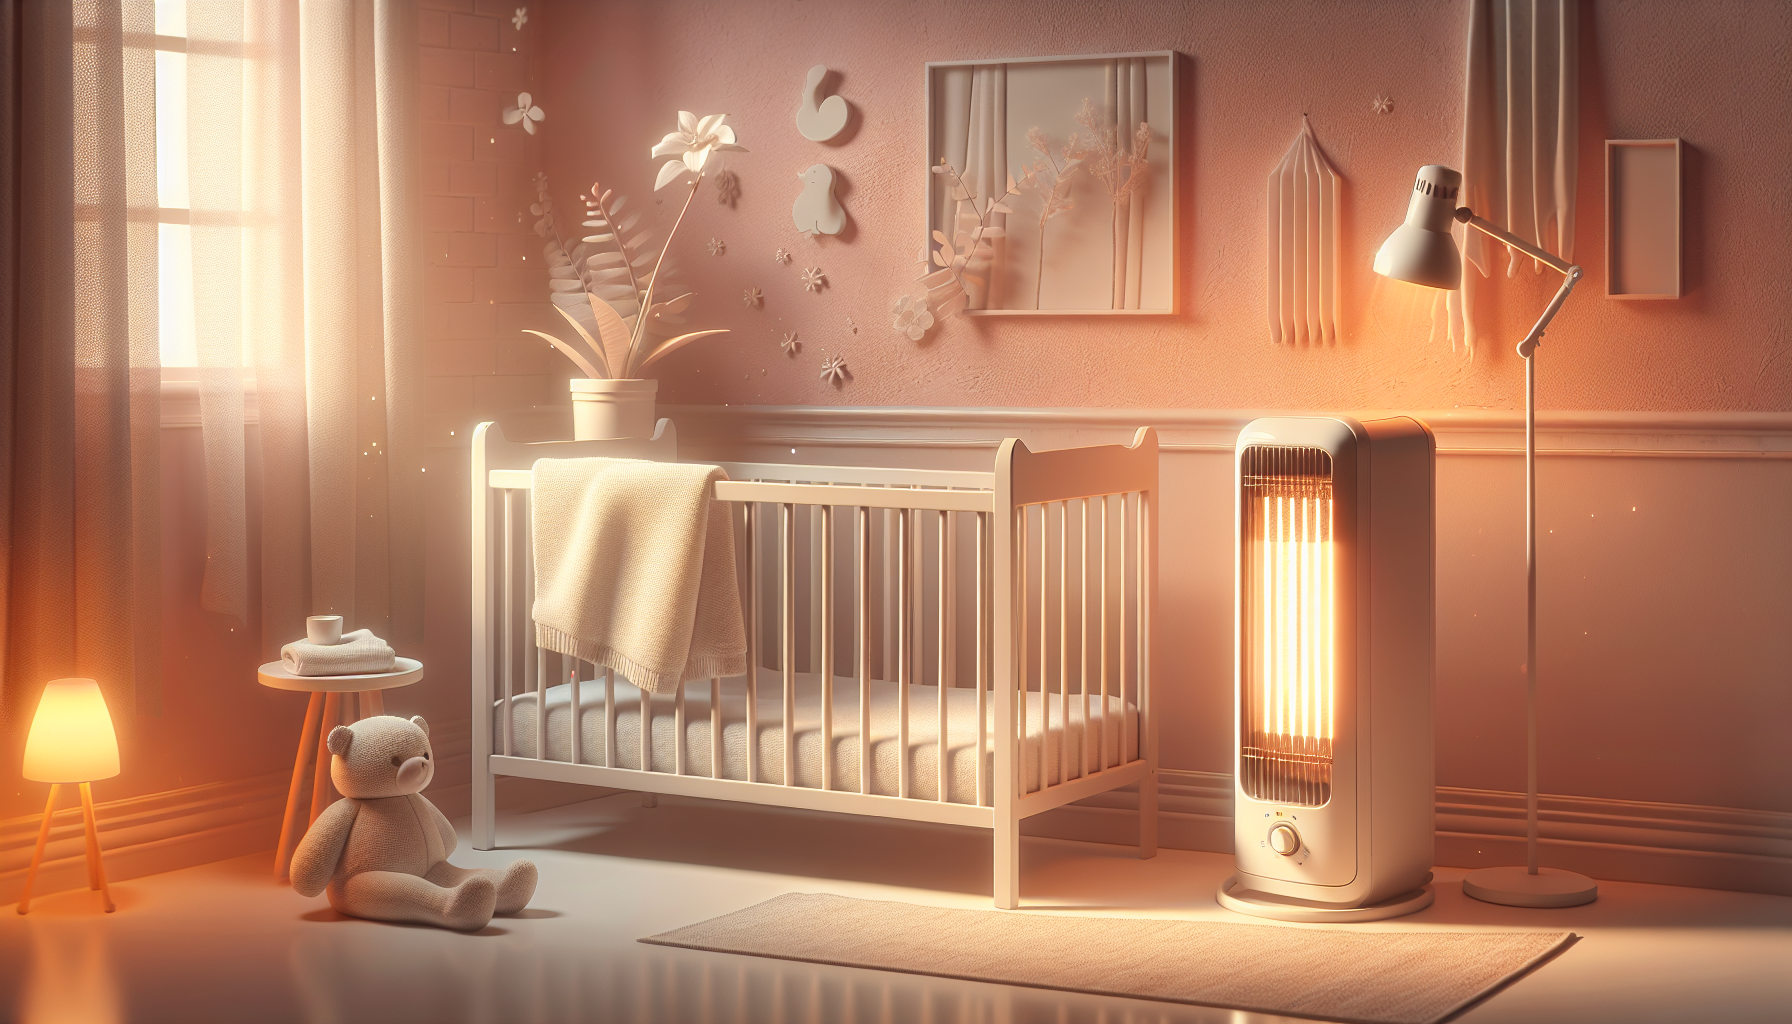 Can a space heater be used in a nursery for babys comfort?